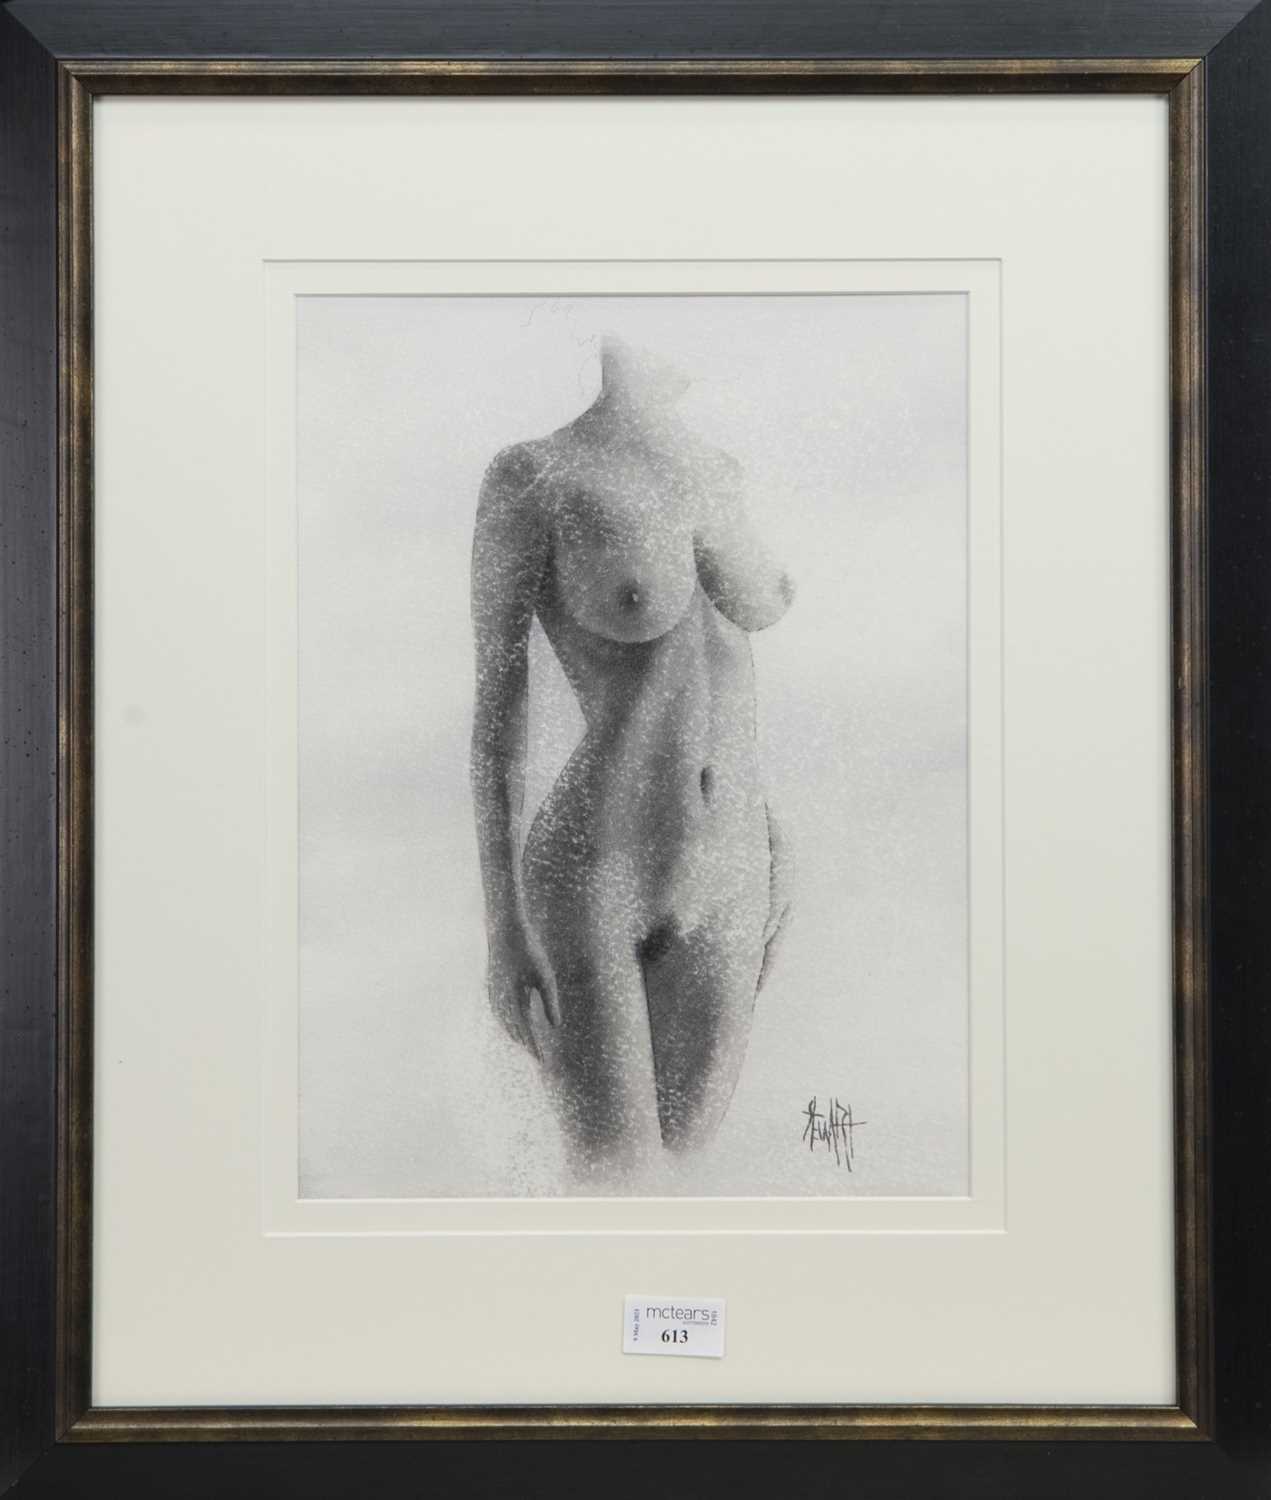 Lot 613 - NUDE STUDY, A WATERCOLOUR BY LEE STEWART